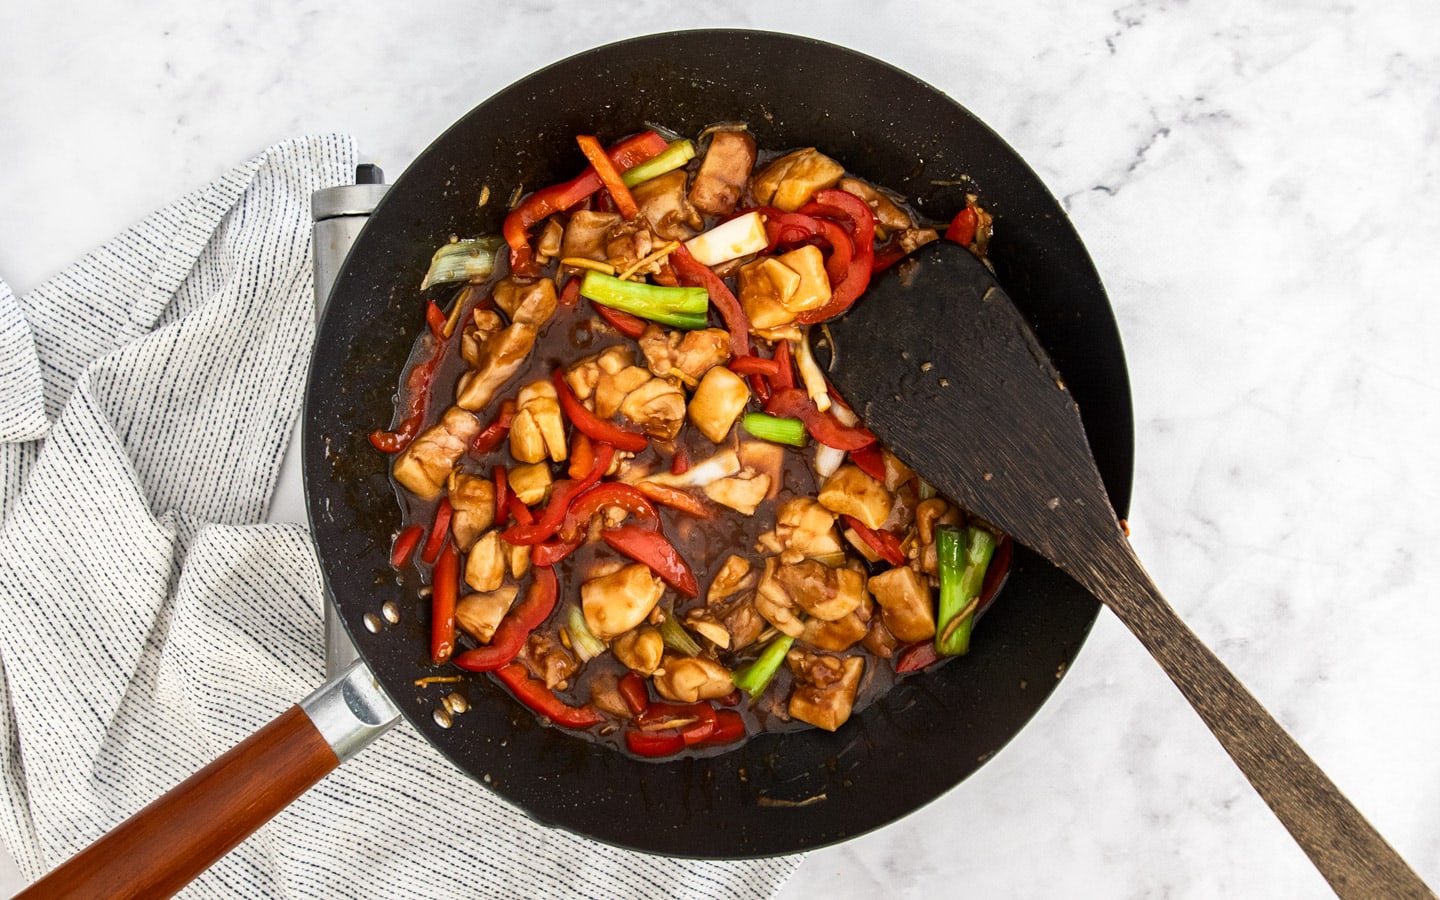 The chicken added back to the wok.